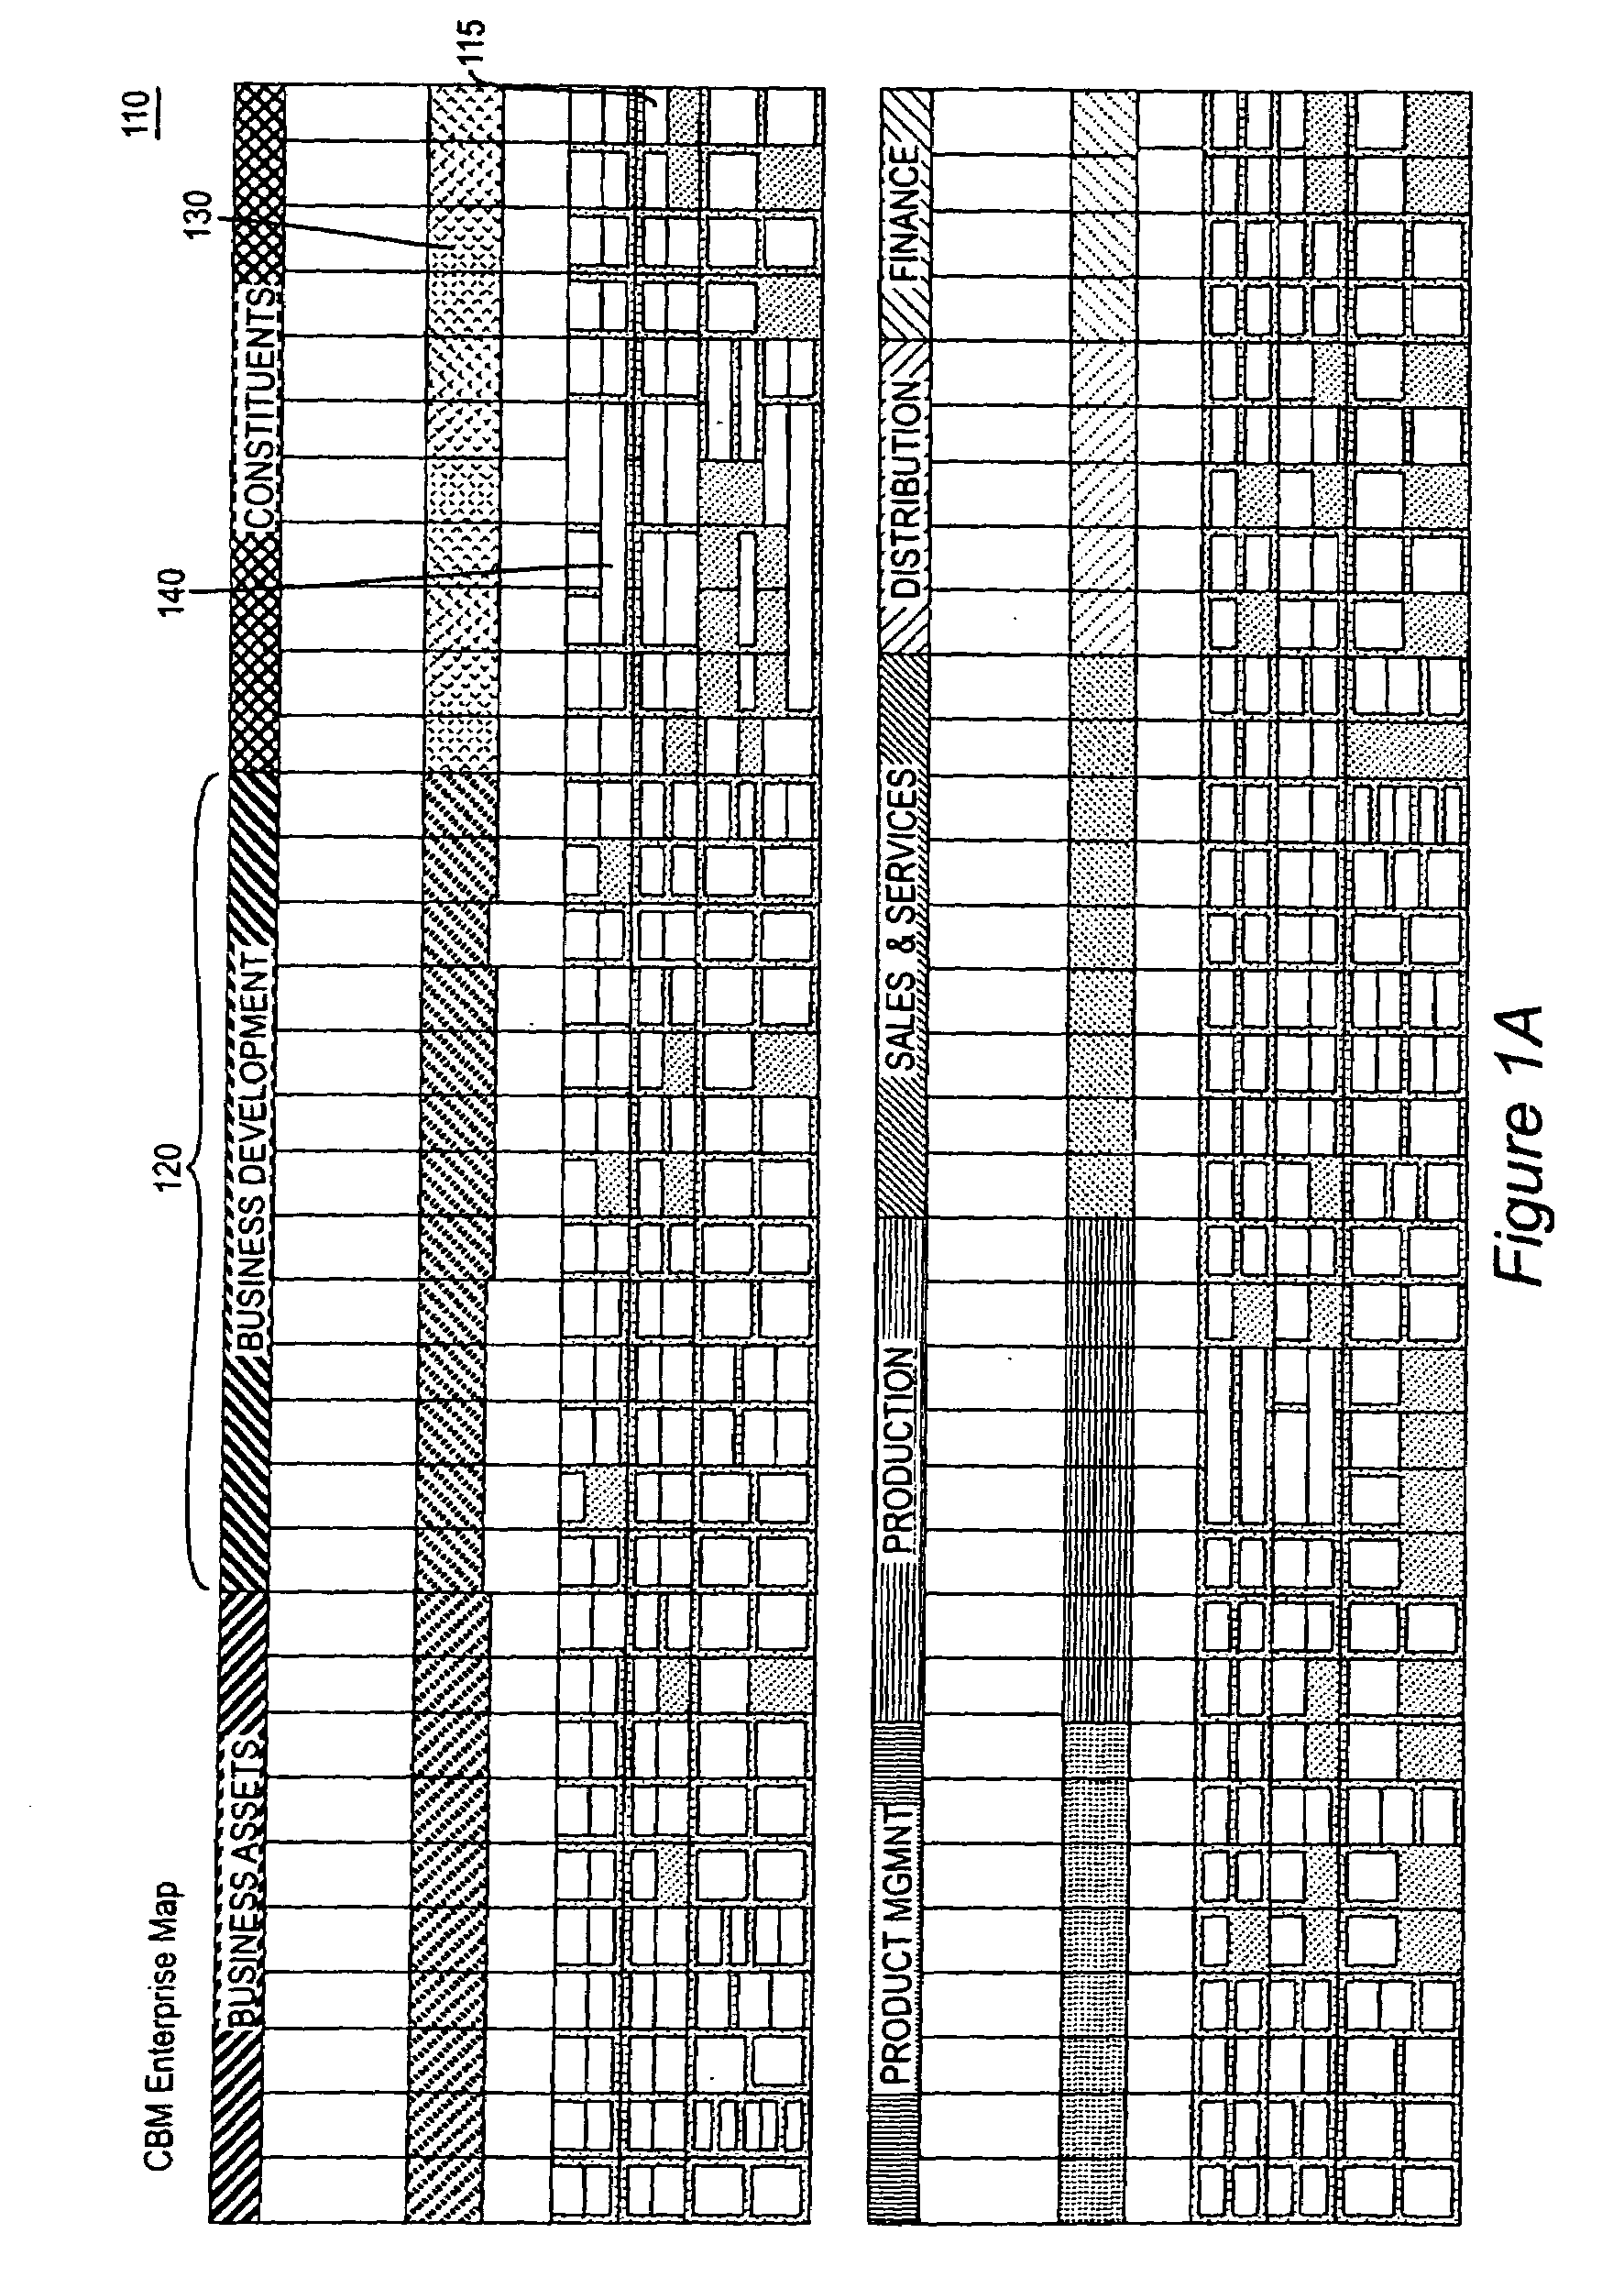 System and method for alignment of an enterprise to a component business model